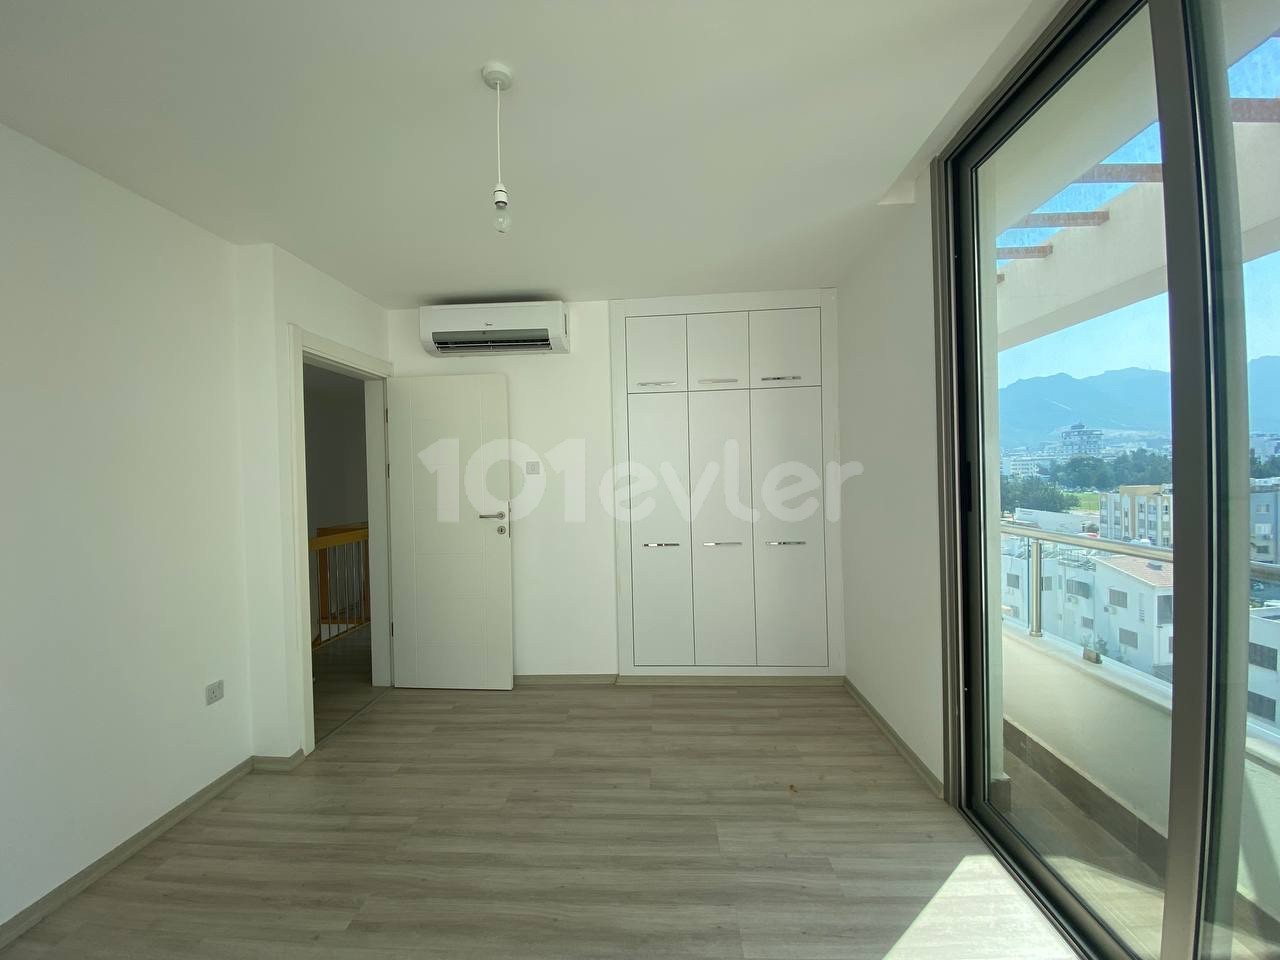 We are a 3 Bedroom Penthouse Duplex Apartment in the Center of Kyrenia with a New Harbor and Sea View ** 